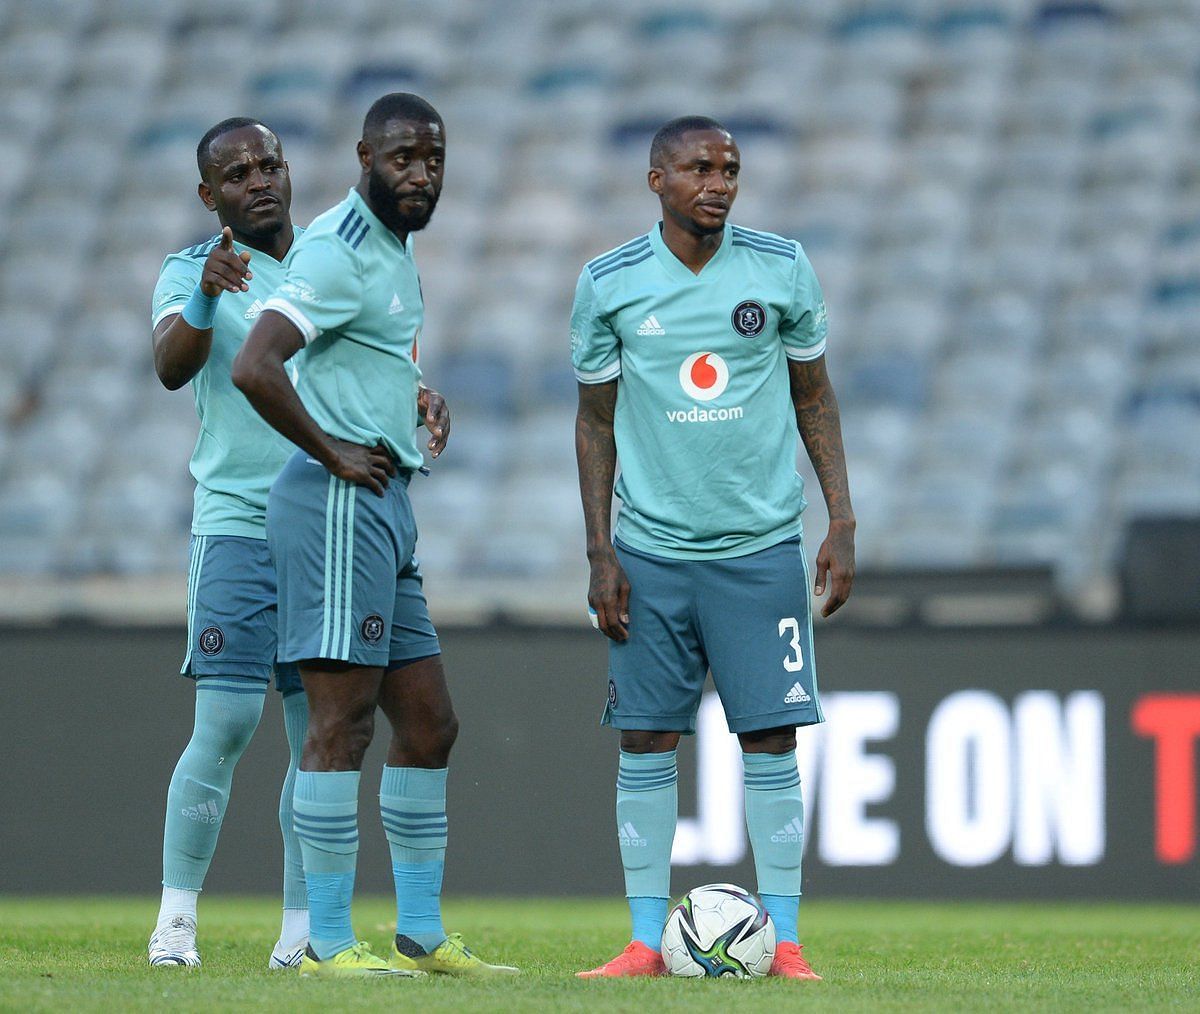 Orlando Pirates take on Diables Noirs in their upcoming CAF Confederation Cup fixture